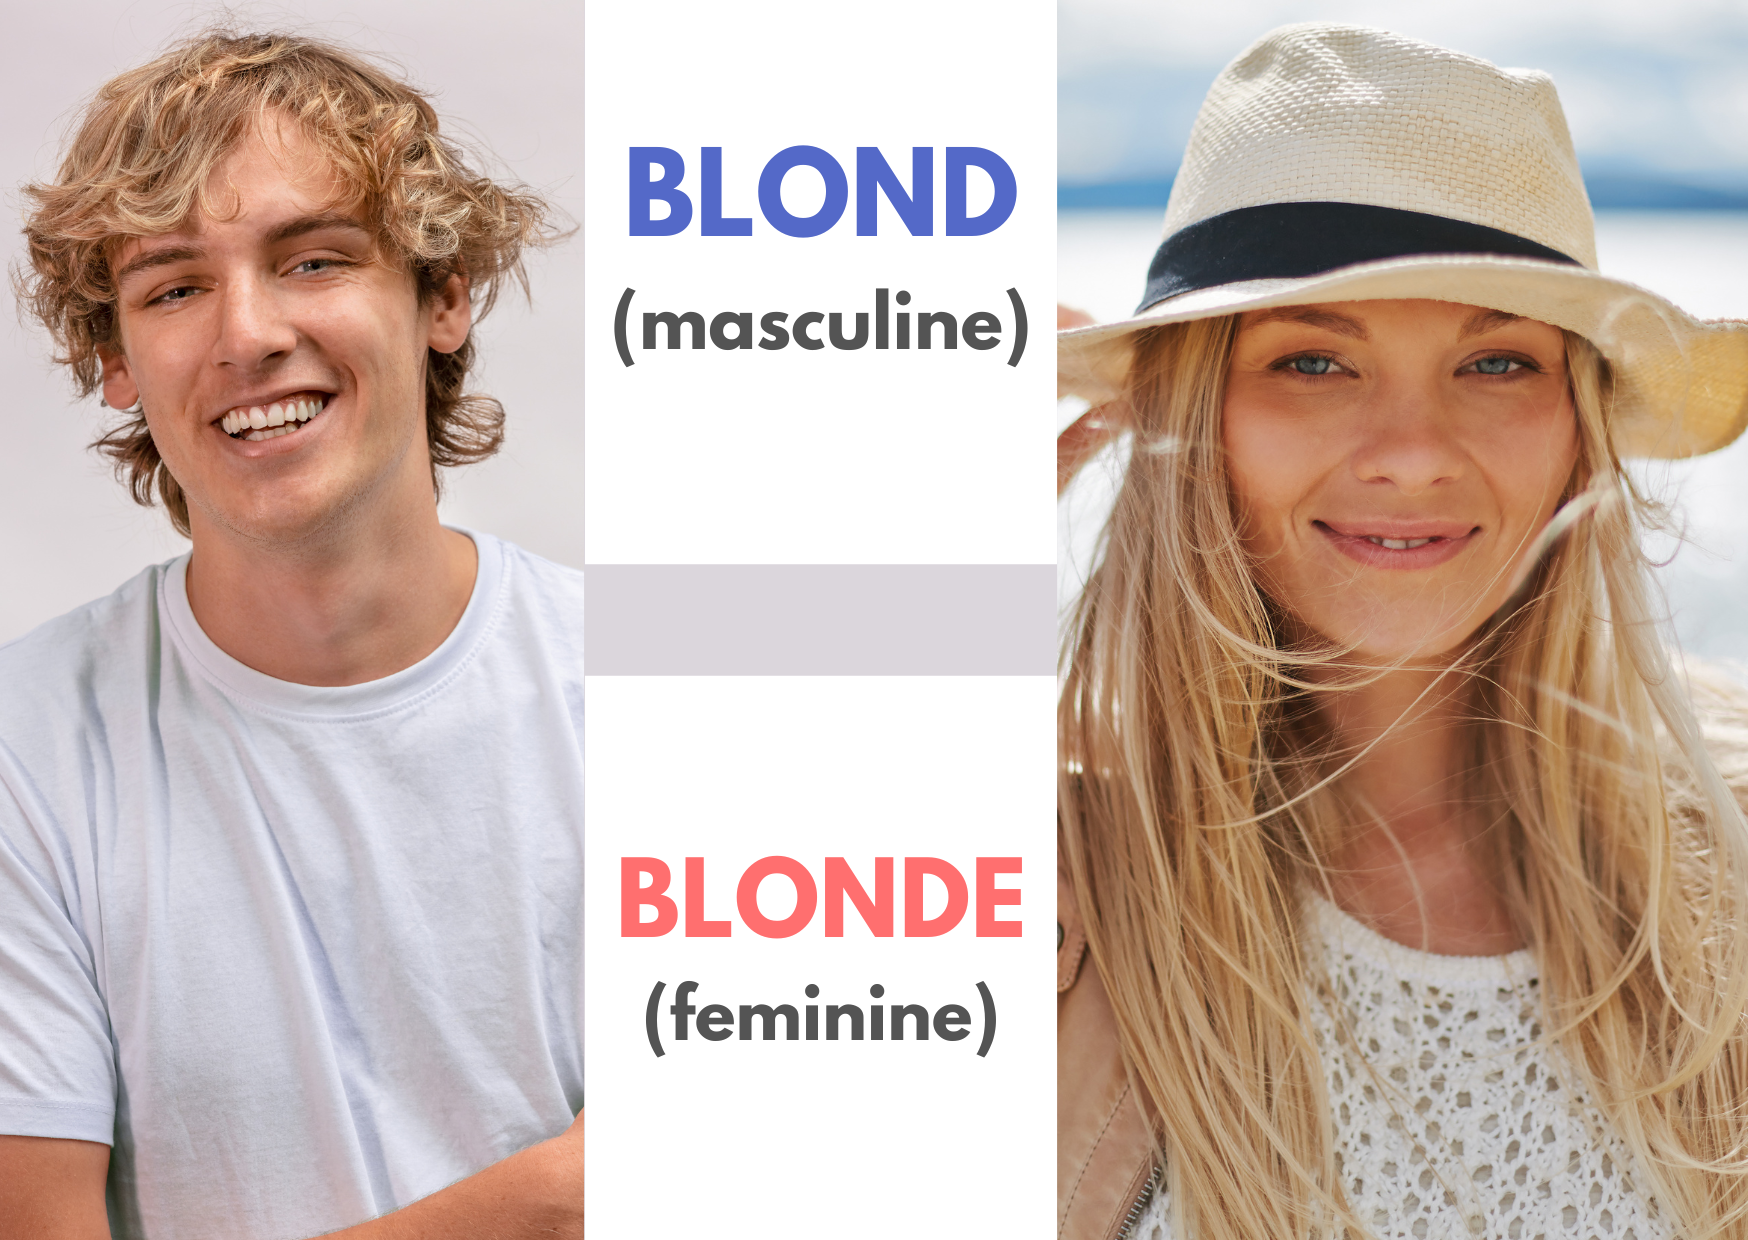 A picture of a blond man with the caption "Blond (masculine)" and a blonde woman with the caption "Blonde (feminine)"